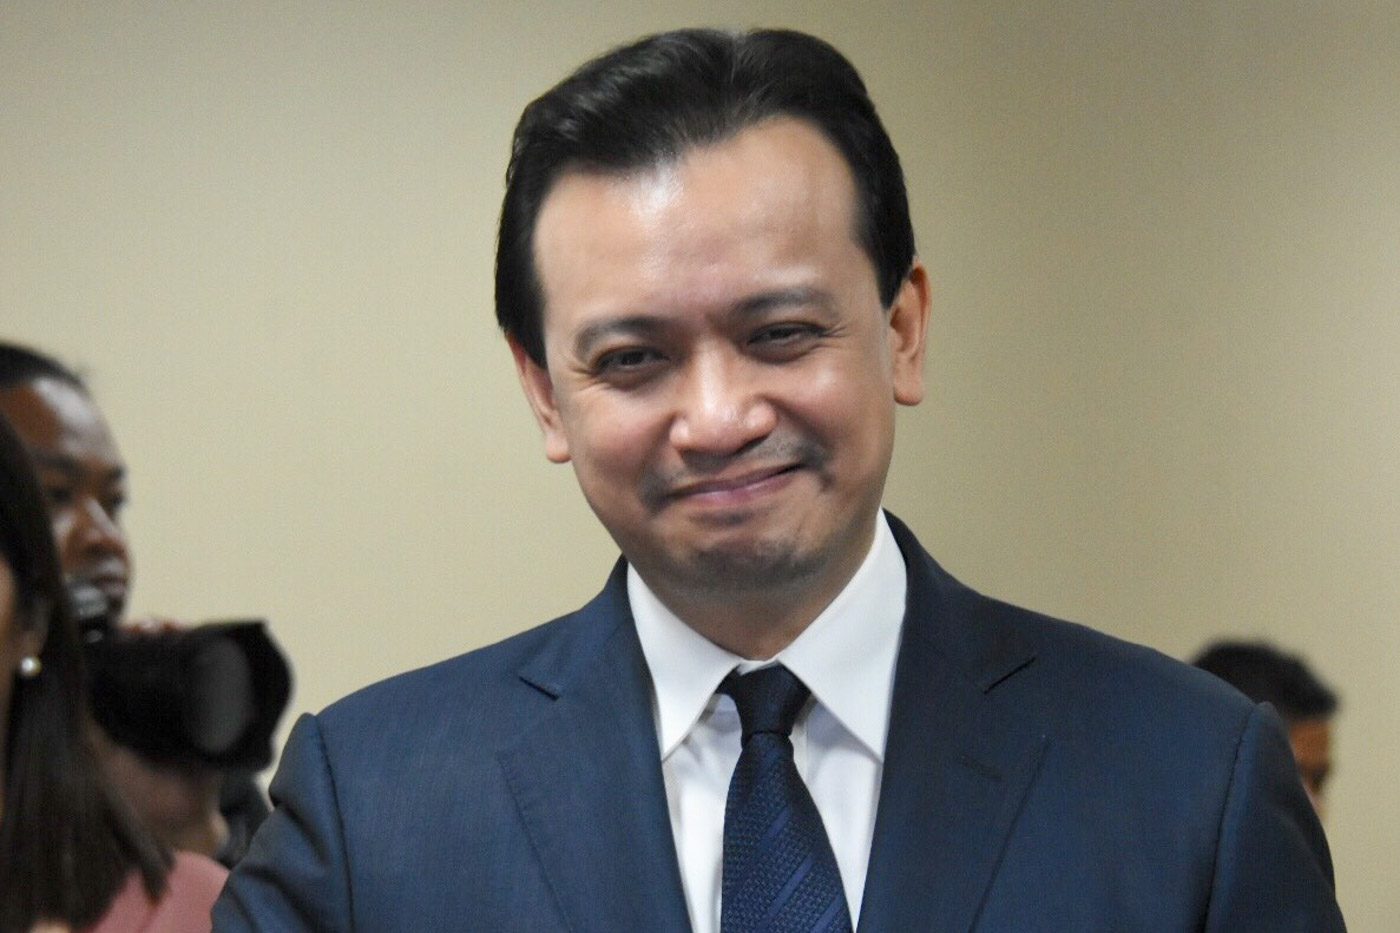 Trillanes says he has no special request if jailed